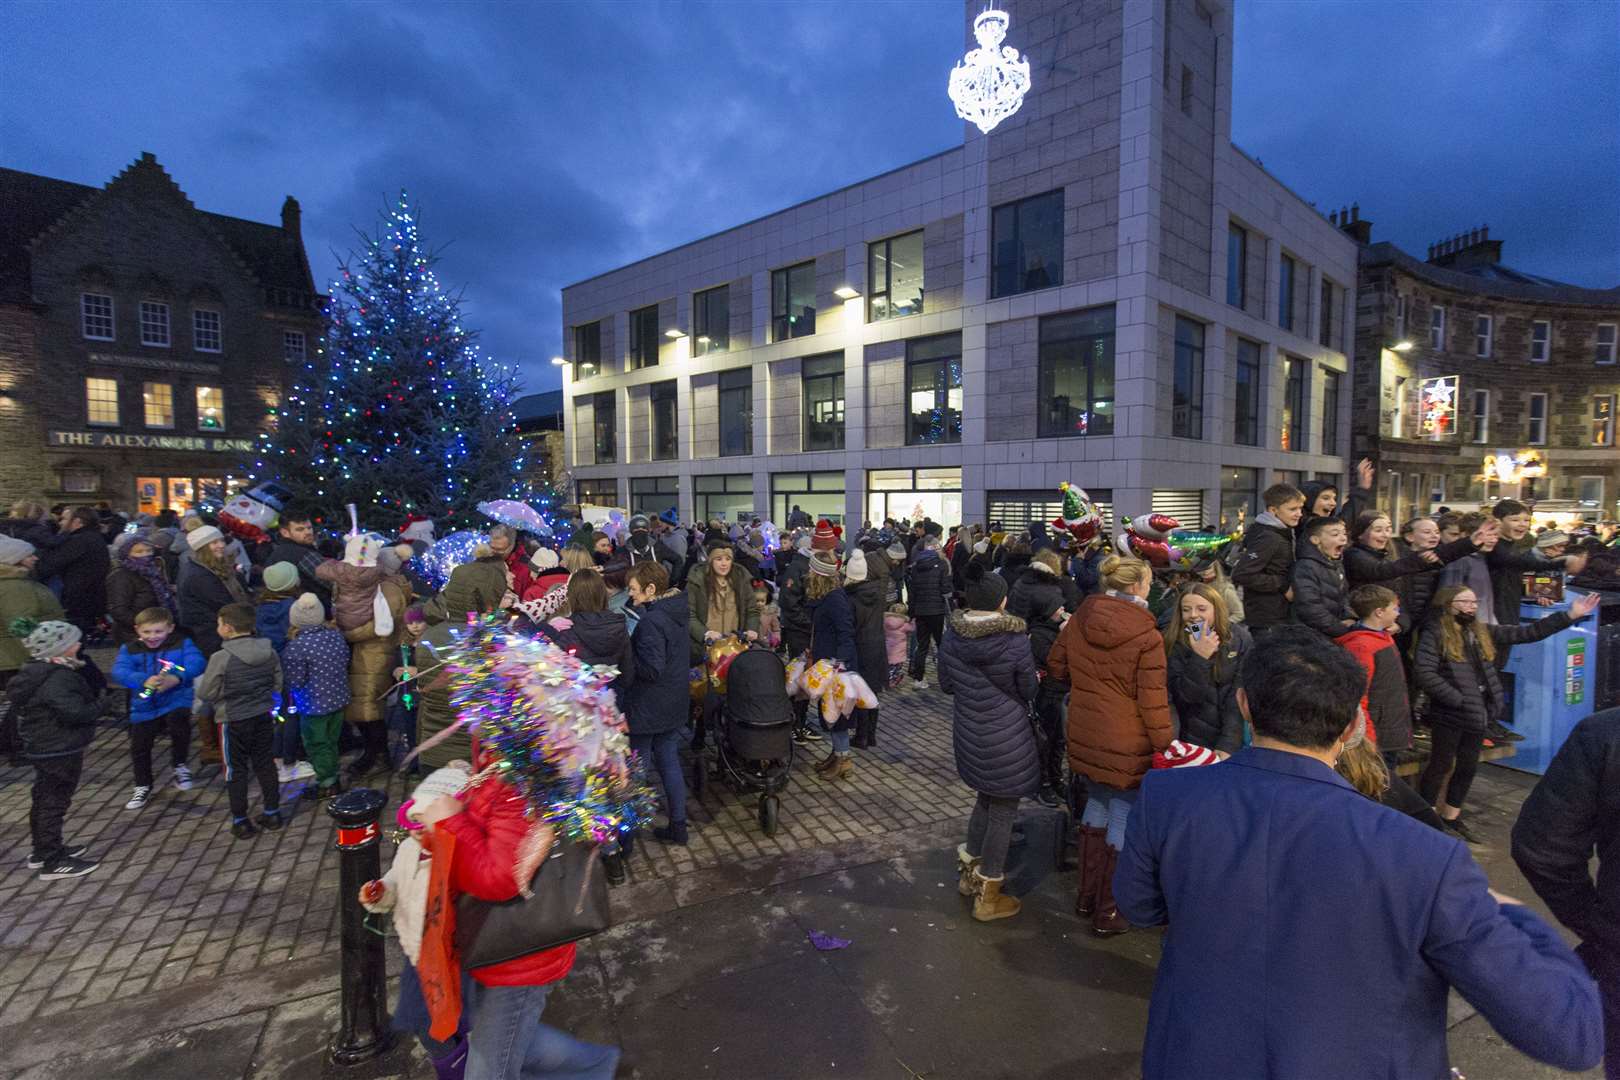 The busy scene in the town centre following the Christmas Lights switch on. Picture: Robert MacDonald/Northern Studios